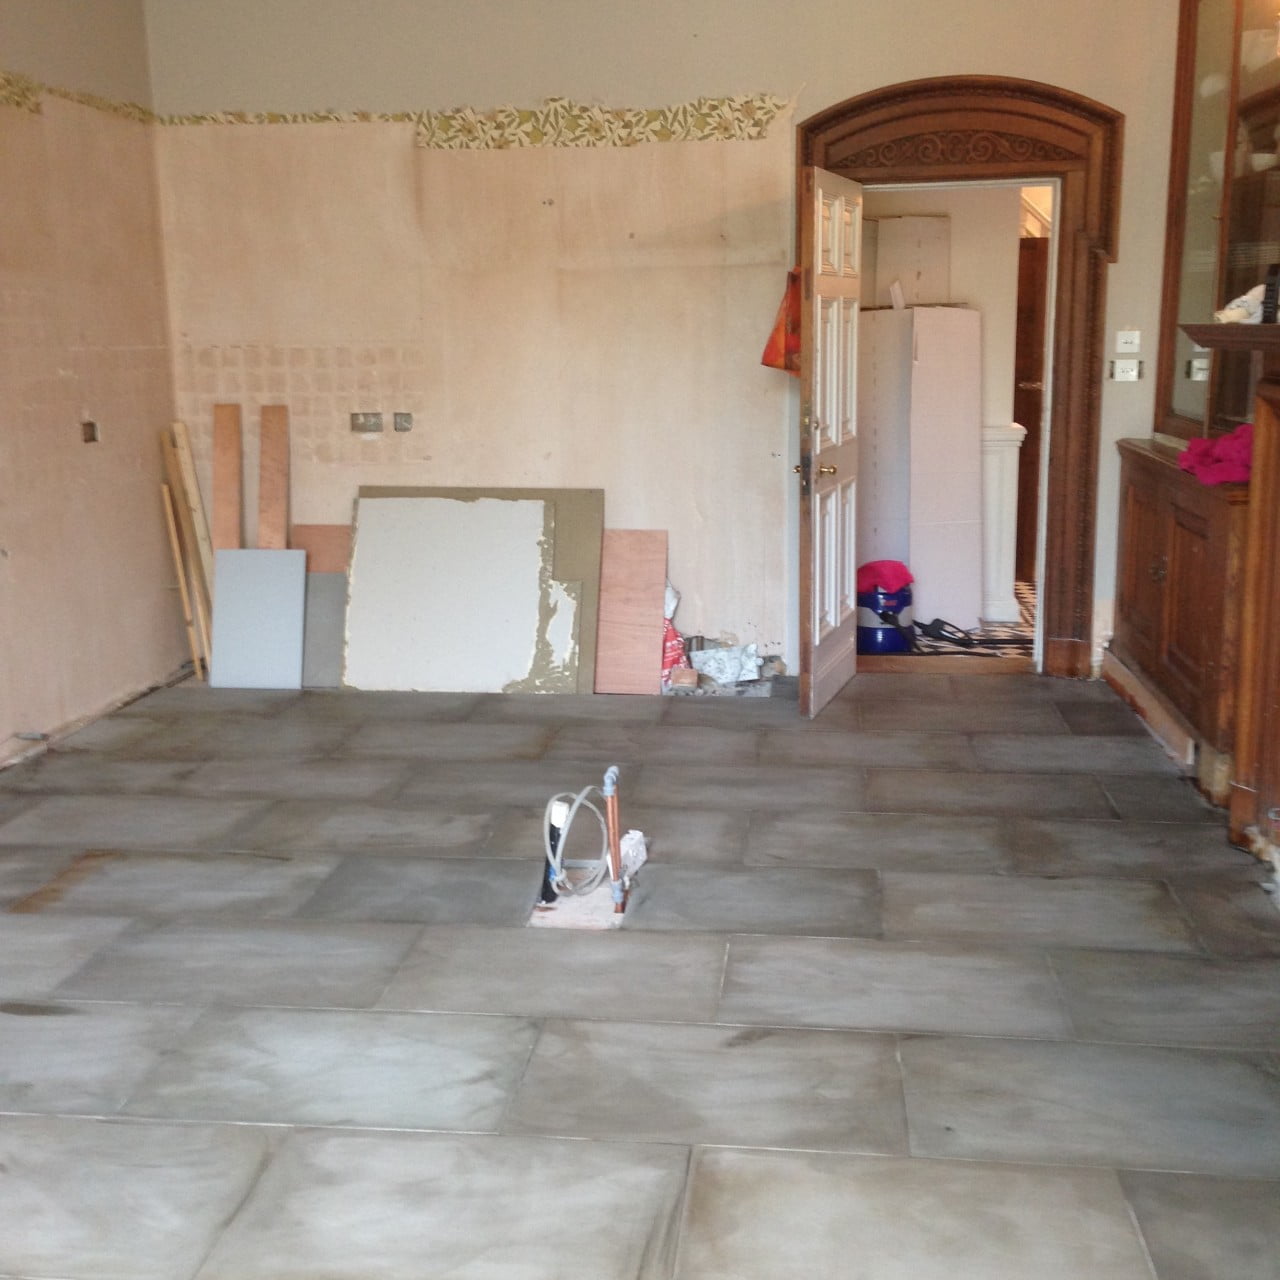 We transformed the kitchen at our Victorian house near Newbury. Here we'd just sealed the new stone floor. As you can see I don't just design gardens!